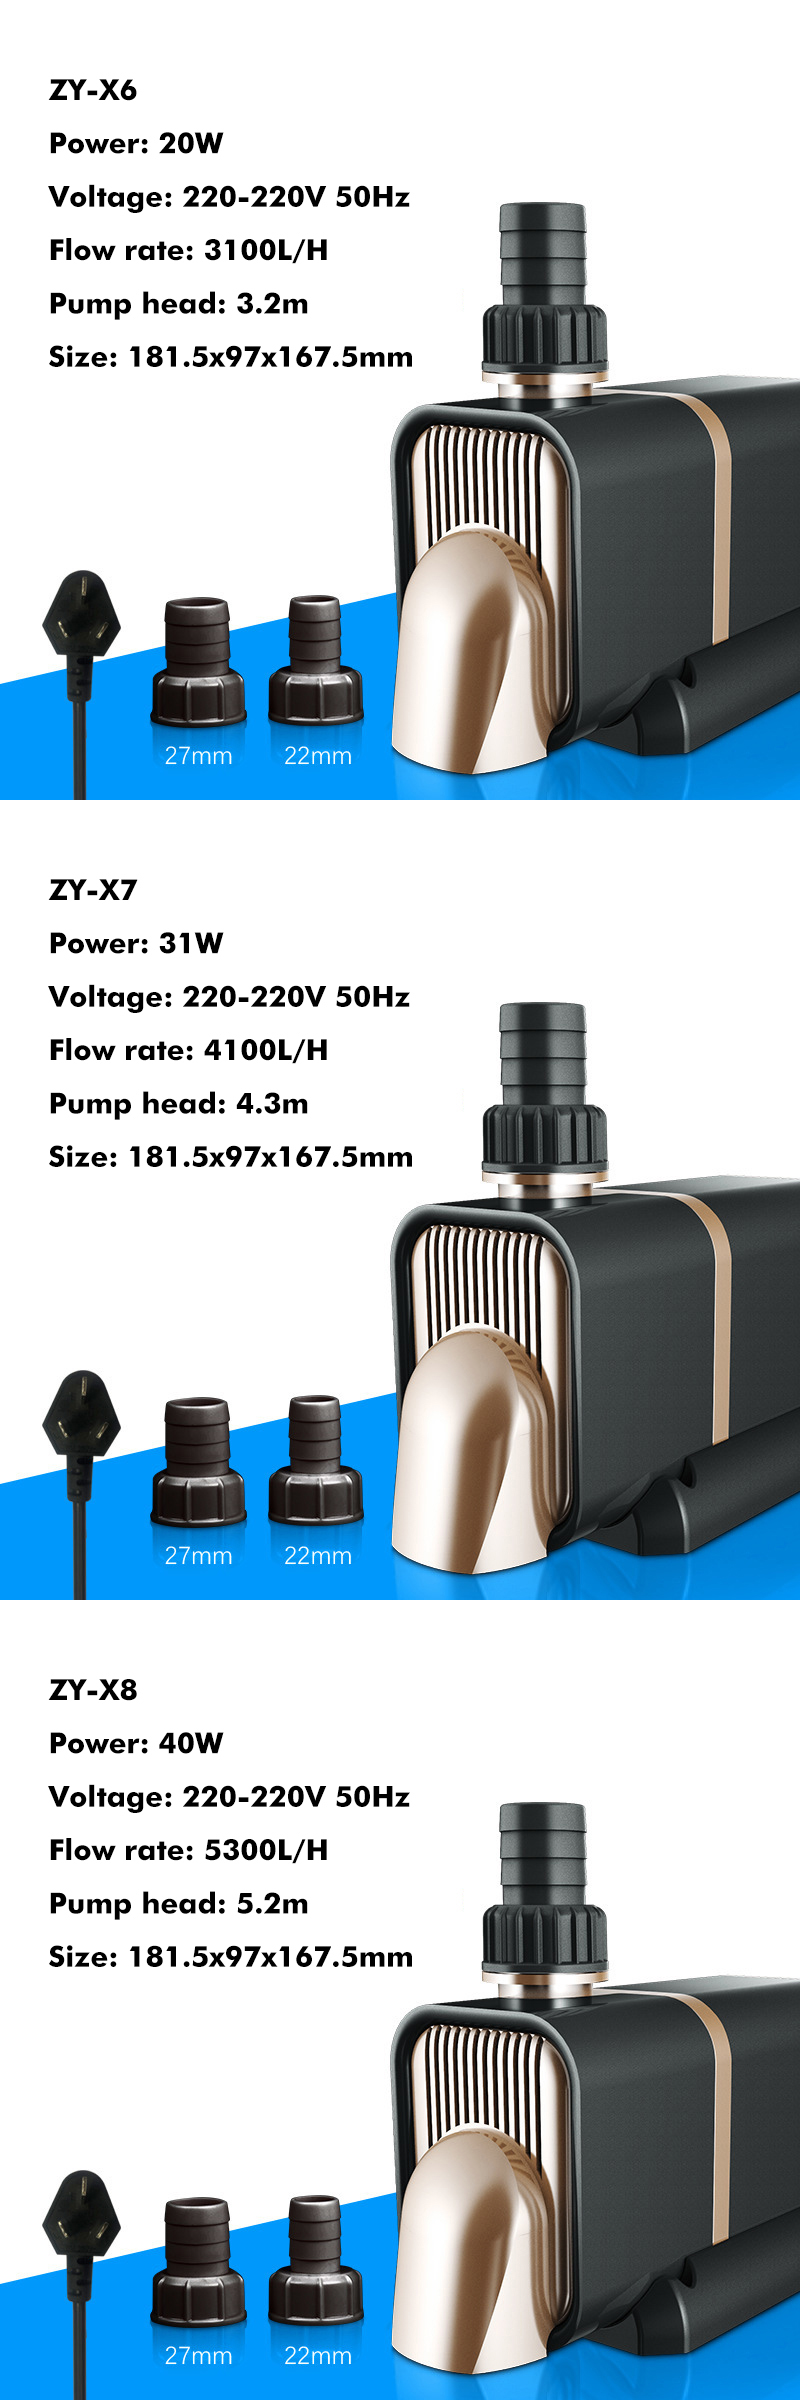 360deg-Submersible-Bottom-Sunction-Pump-Low-Noise-Prevent-Dry-Burning-Frequency-Conversion-Water-Pum-1565174-10